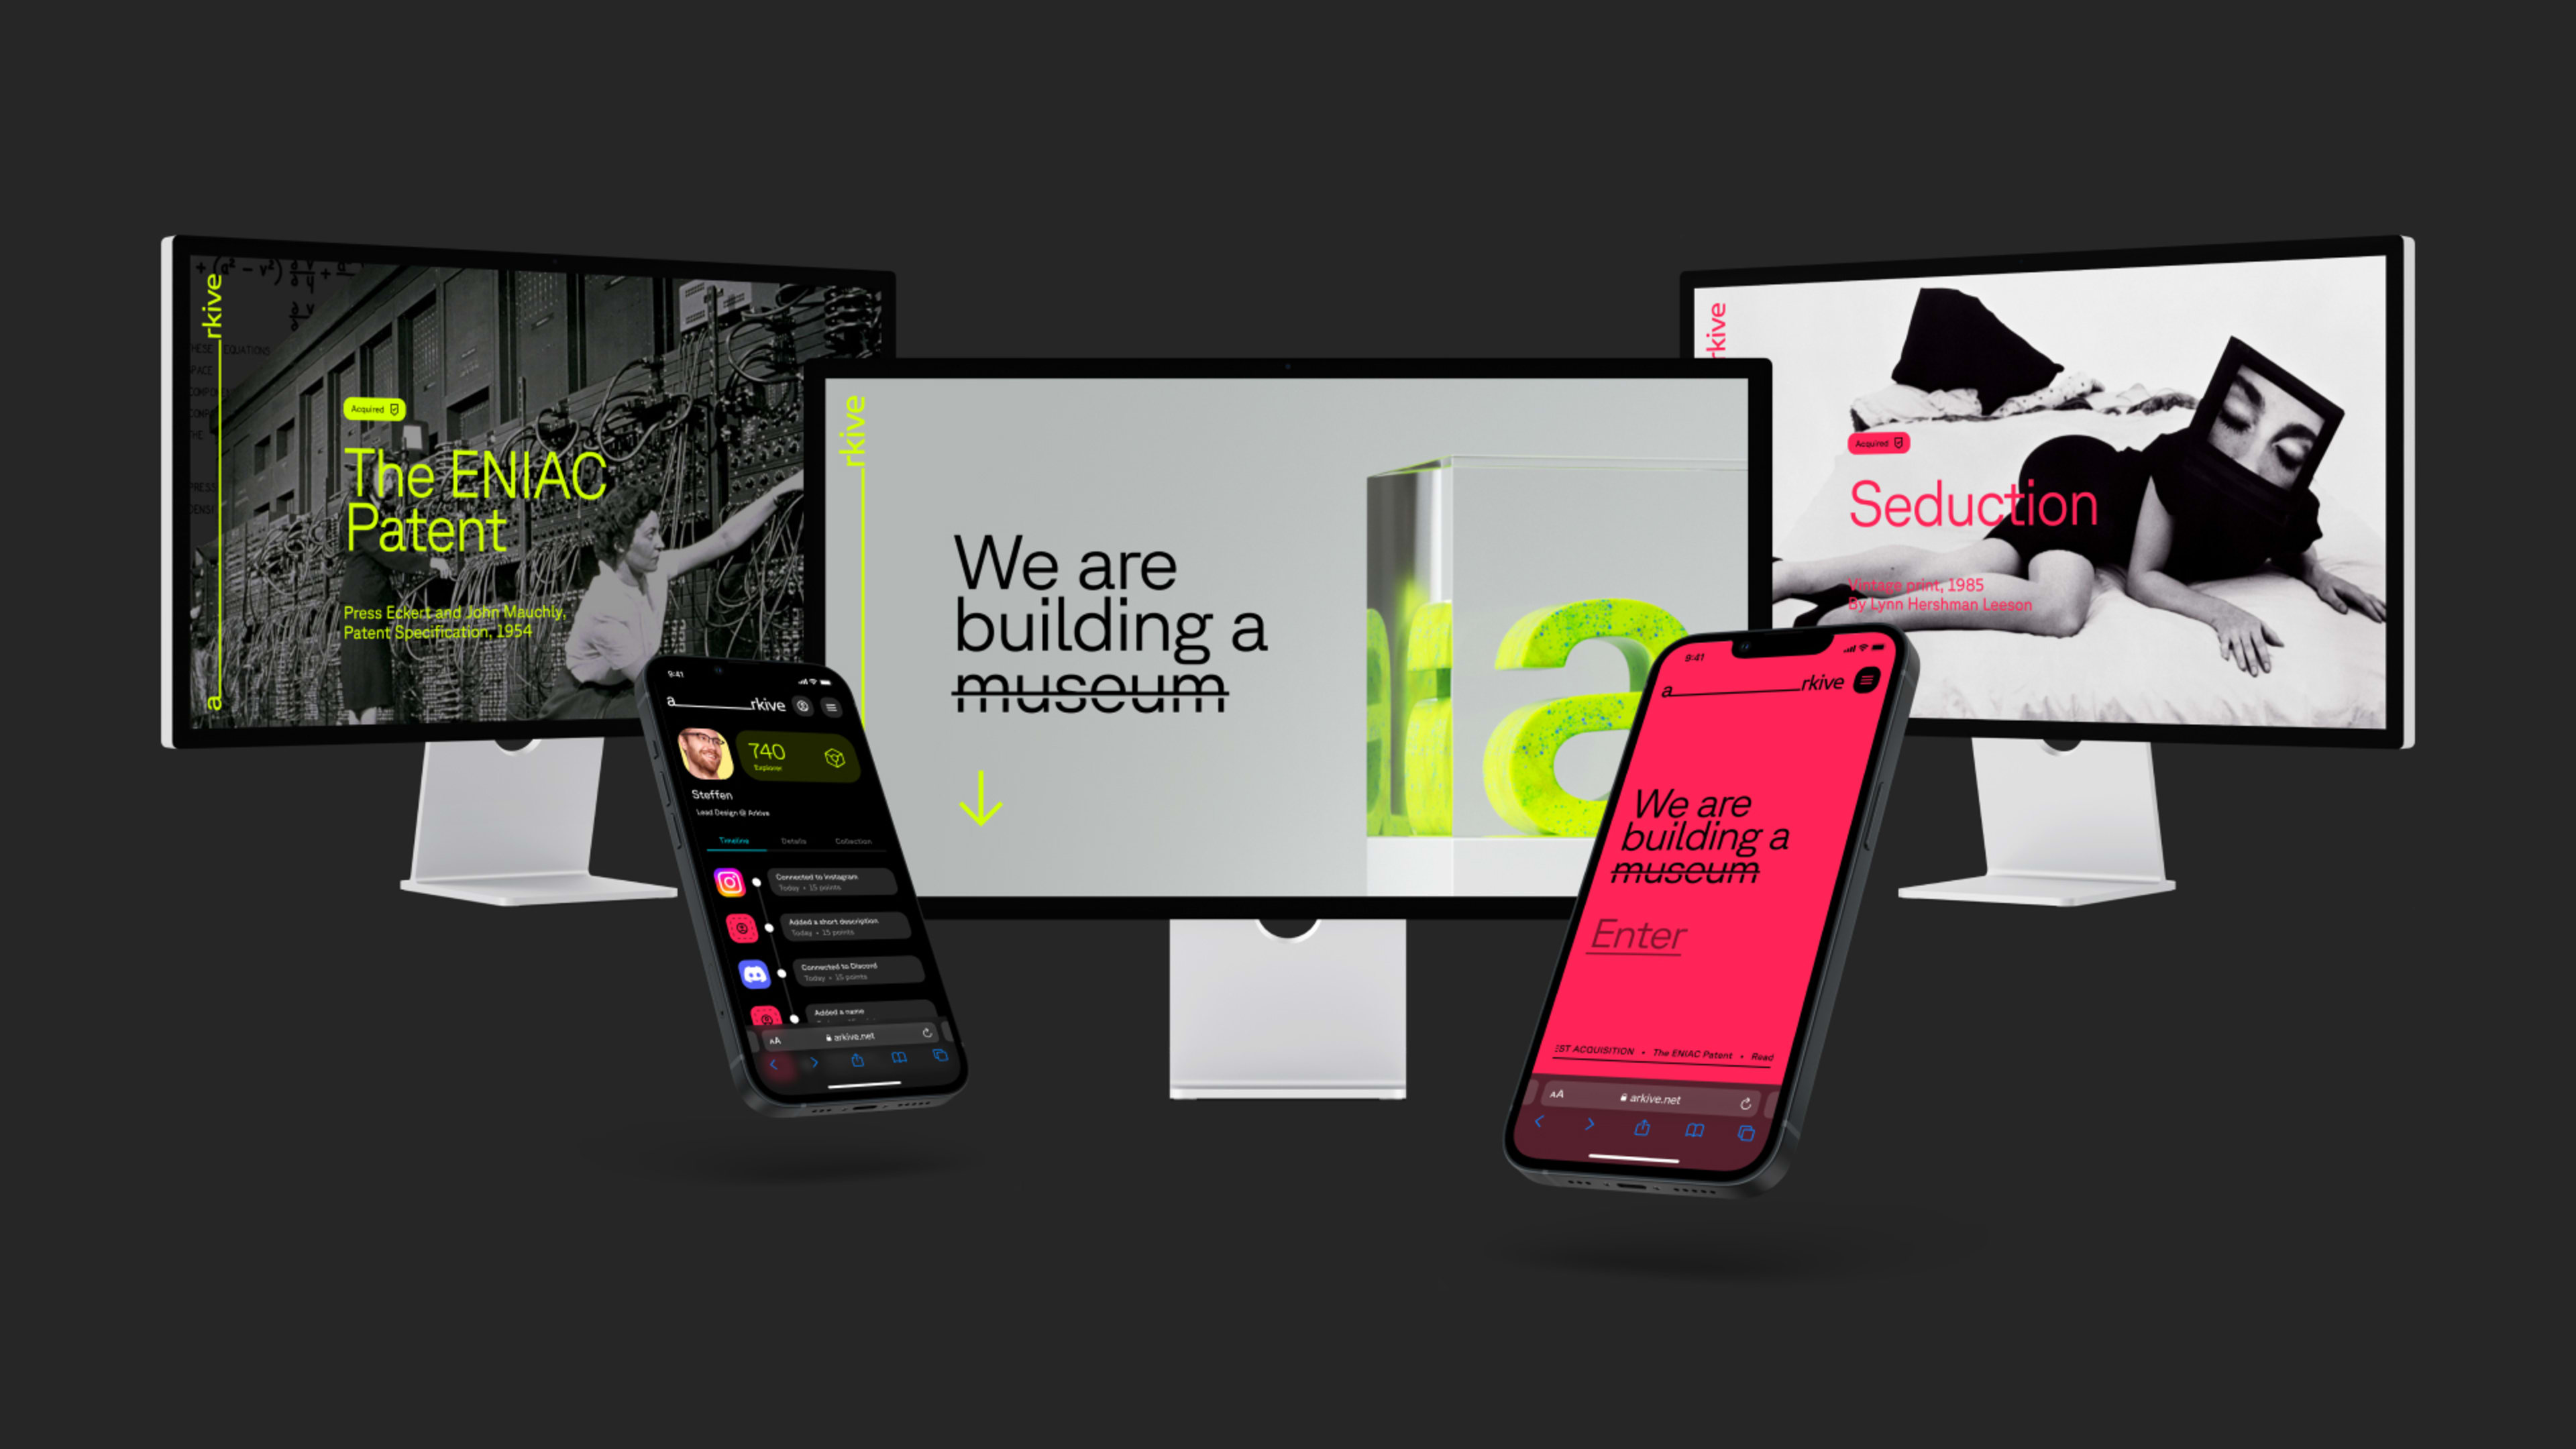 This new startup aims to build the first ‘decentralized, physical museum’